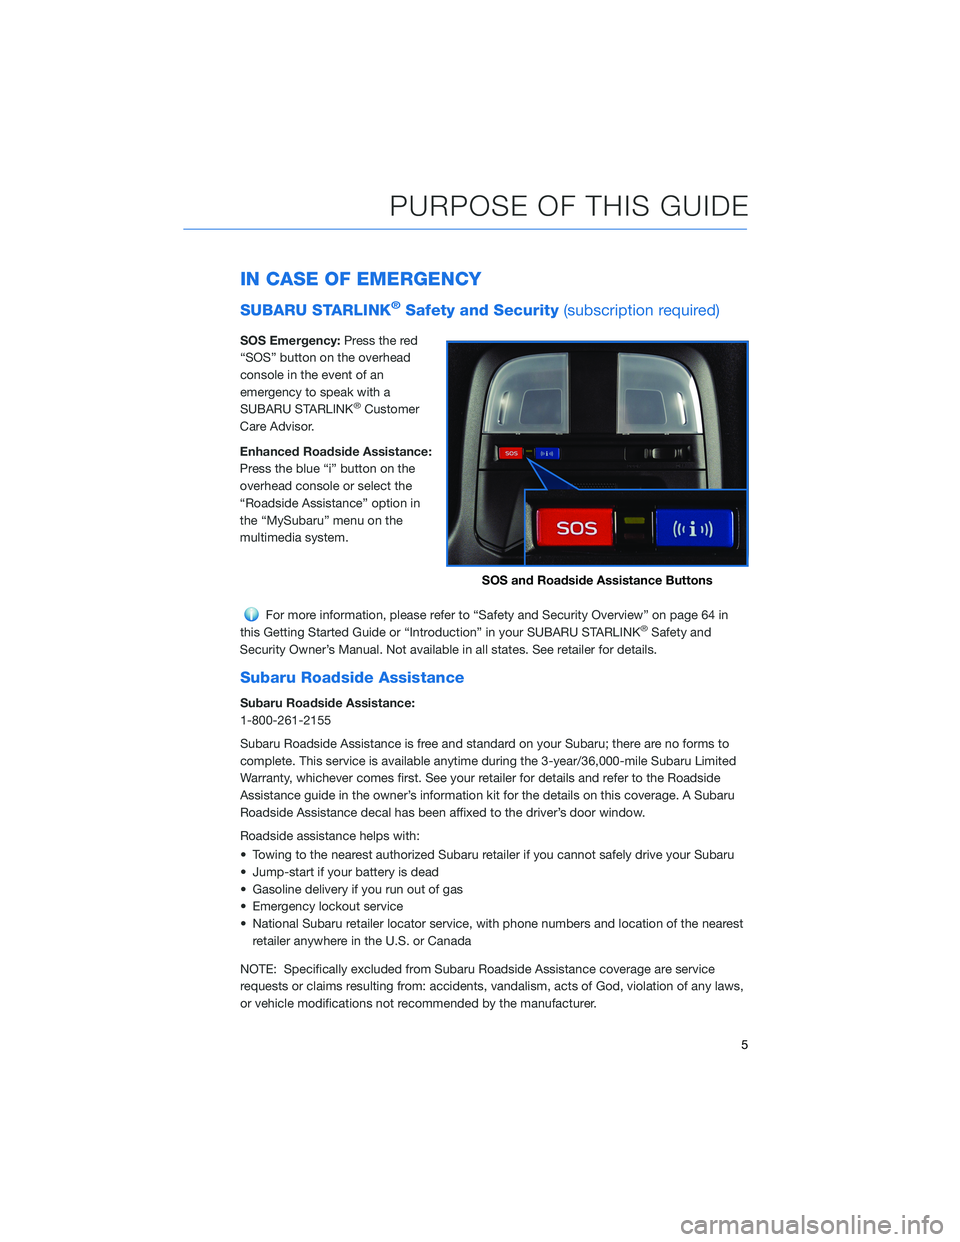 SUBARU BRZ 2022  Getting Started Guide IN CASE OF EMERGENCY
SUBARU STARLINK®Safety and Security(subscription required)
SOS Emergency:Press the red
“SOS” button on the overhead
console in the event of an
emergency to speak with a
SUBAR